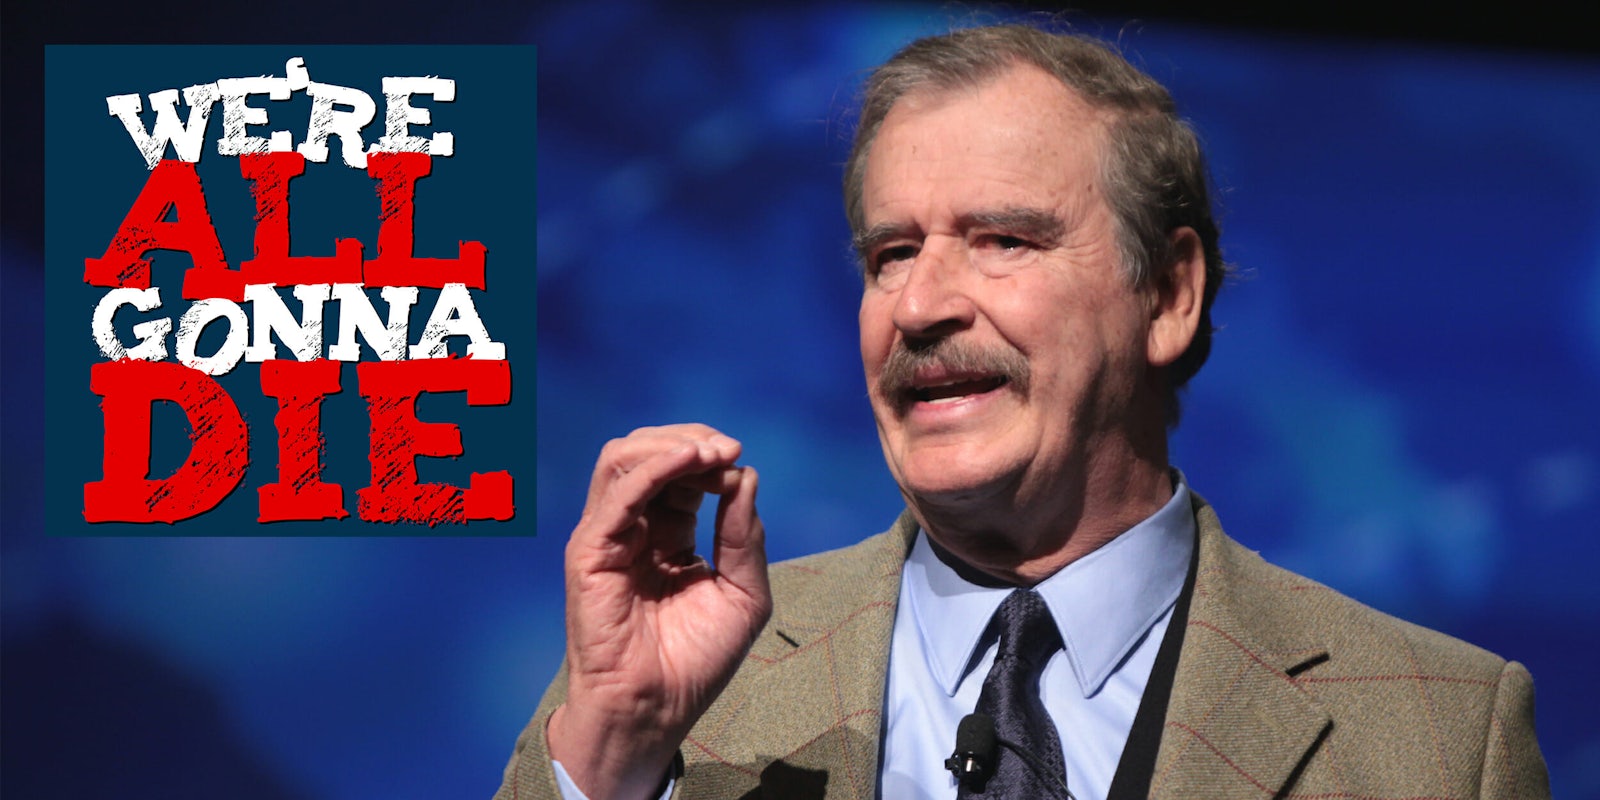 ‘We’re All Gonna Die,’ Ep. 48: Vincente Fox and Friends